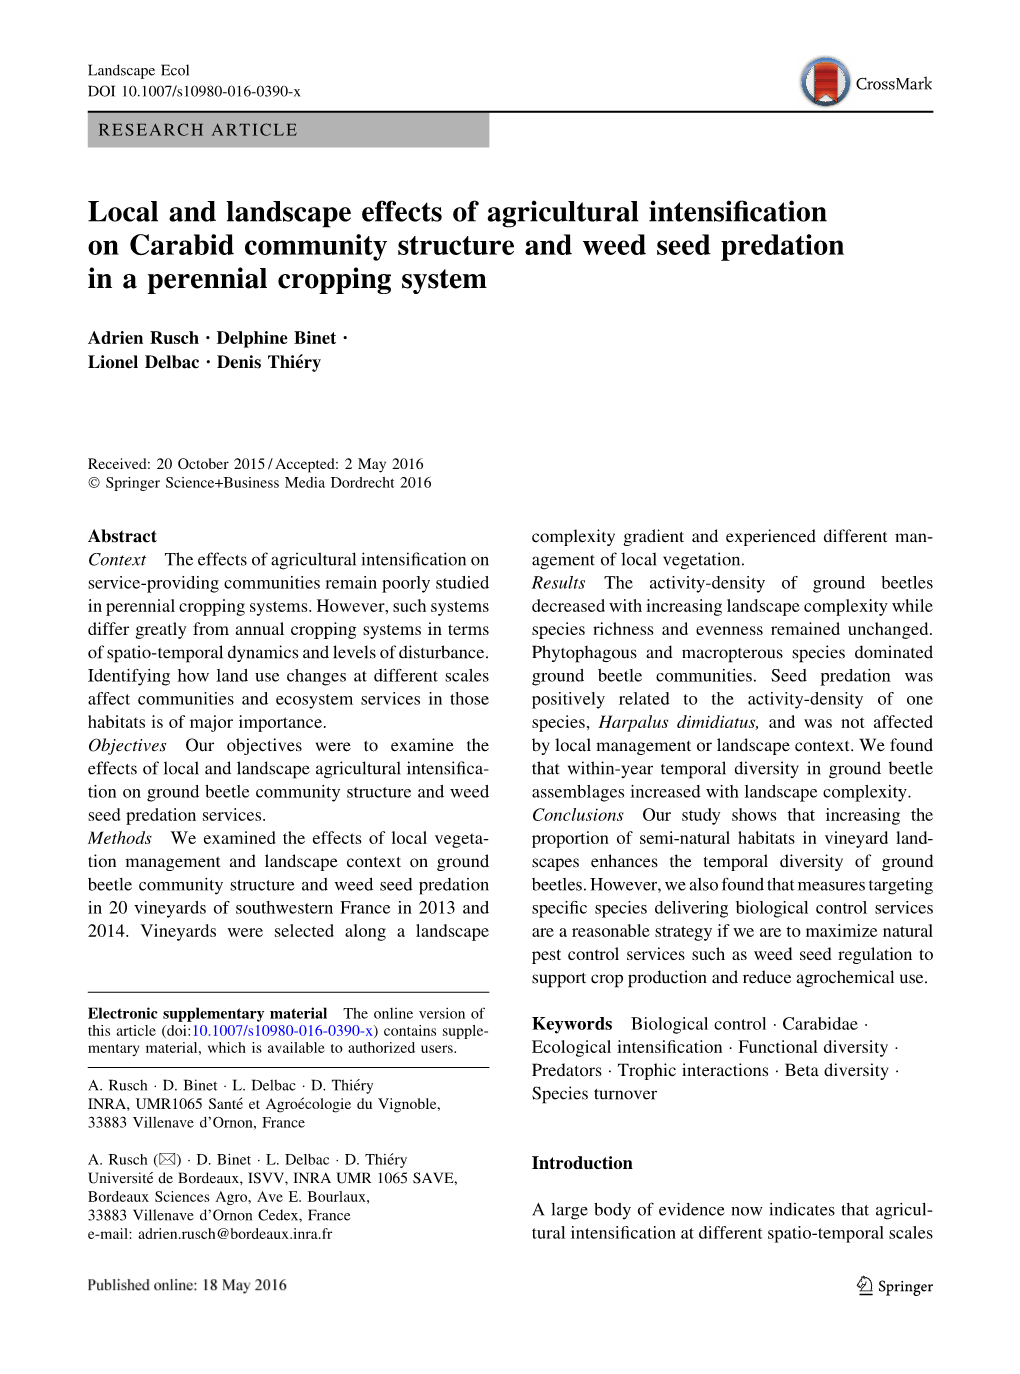 Local and Landscape Effects of Agricultural Intensification On